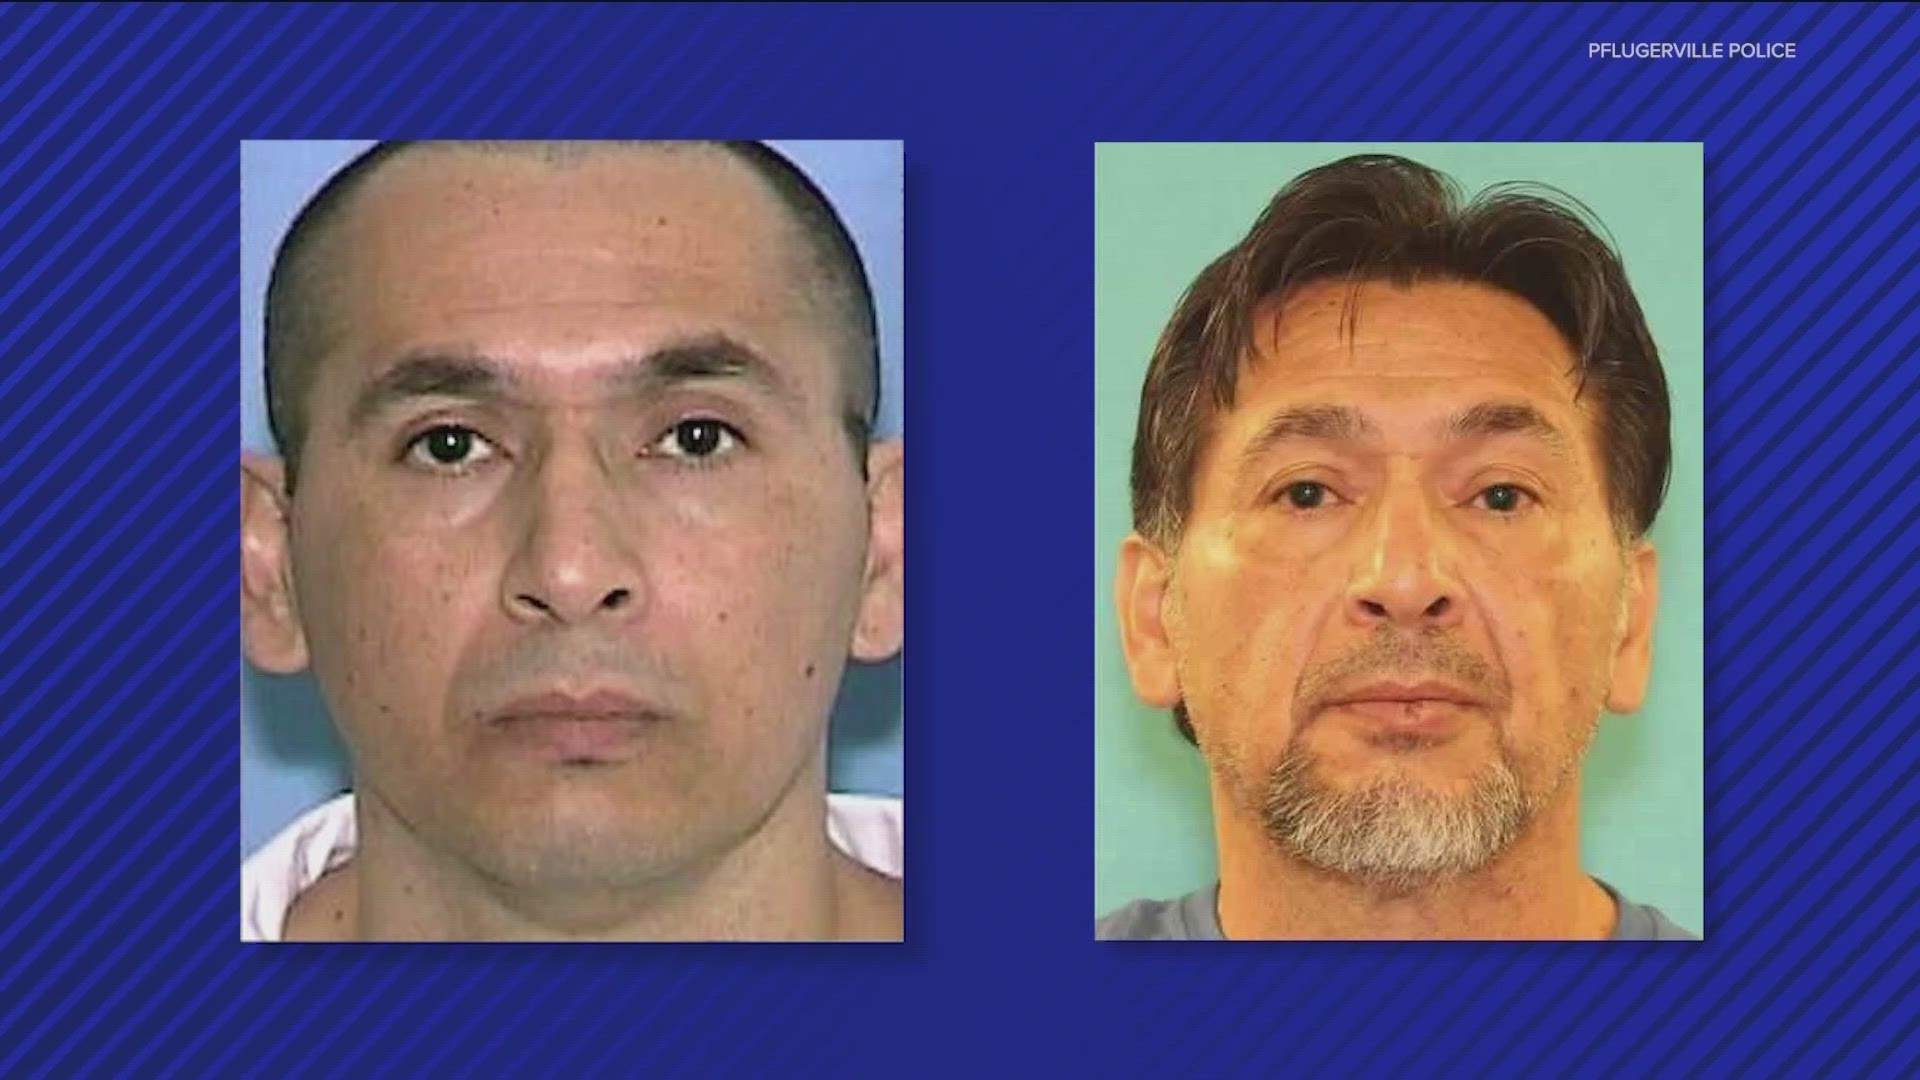 Meza is a known violent criminal in Austin, tied to the murder of an 8-year-old girl in South Austin in 1982. The murder of Jesse Fraga sparked the latest manhunt.